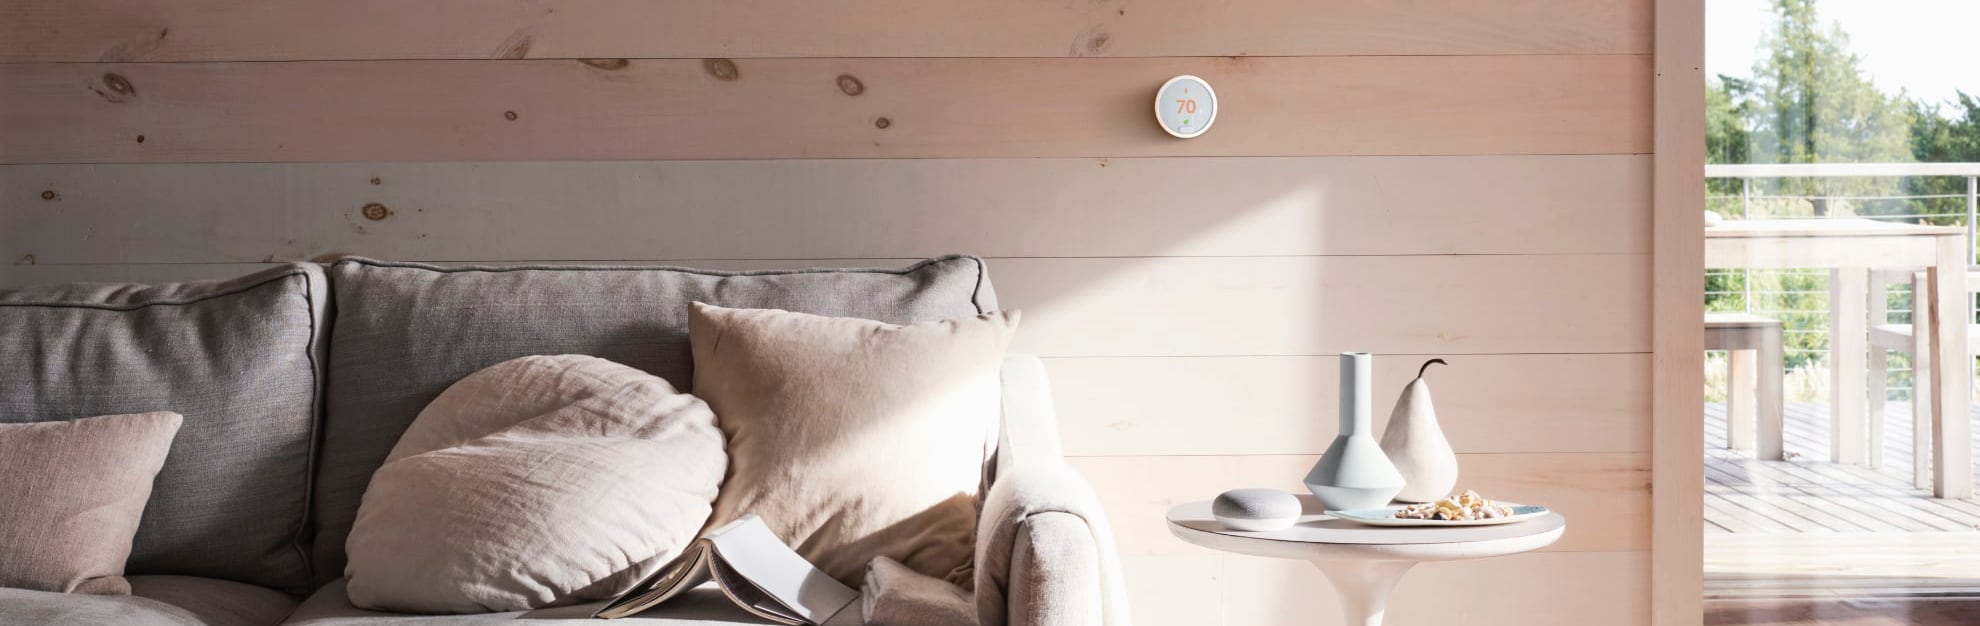 Vivint Home Automation in Sandy Springs